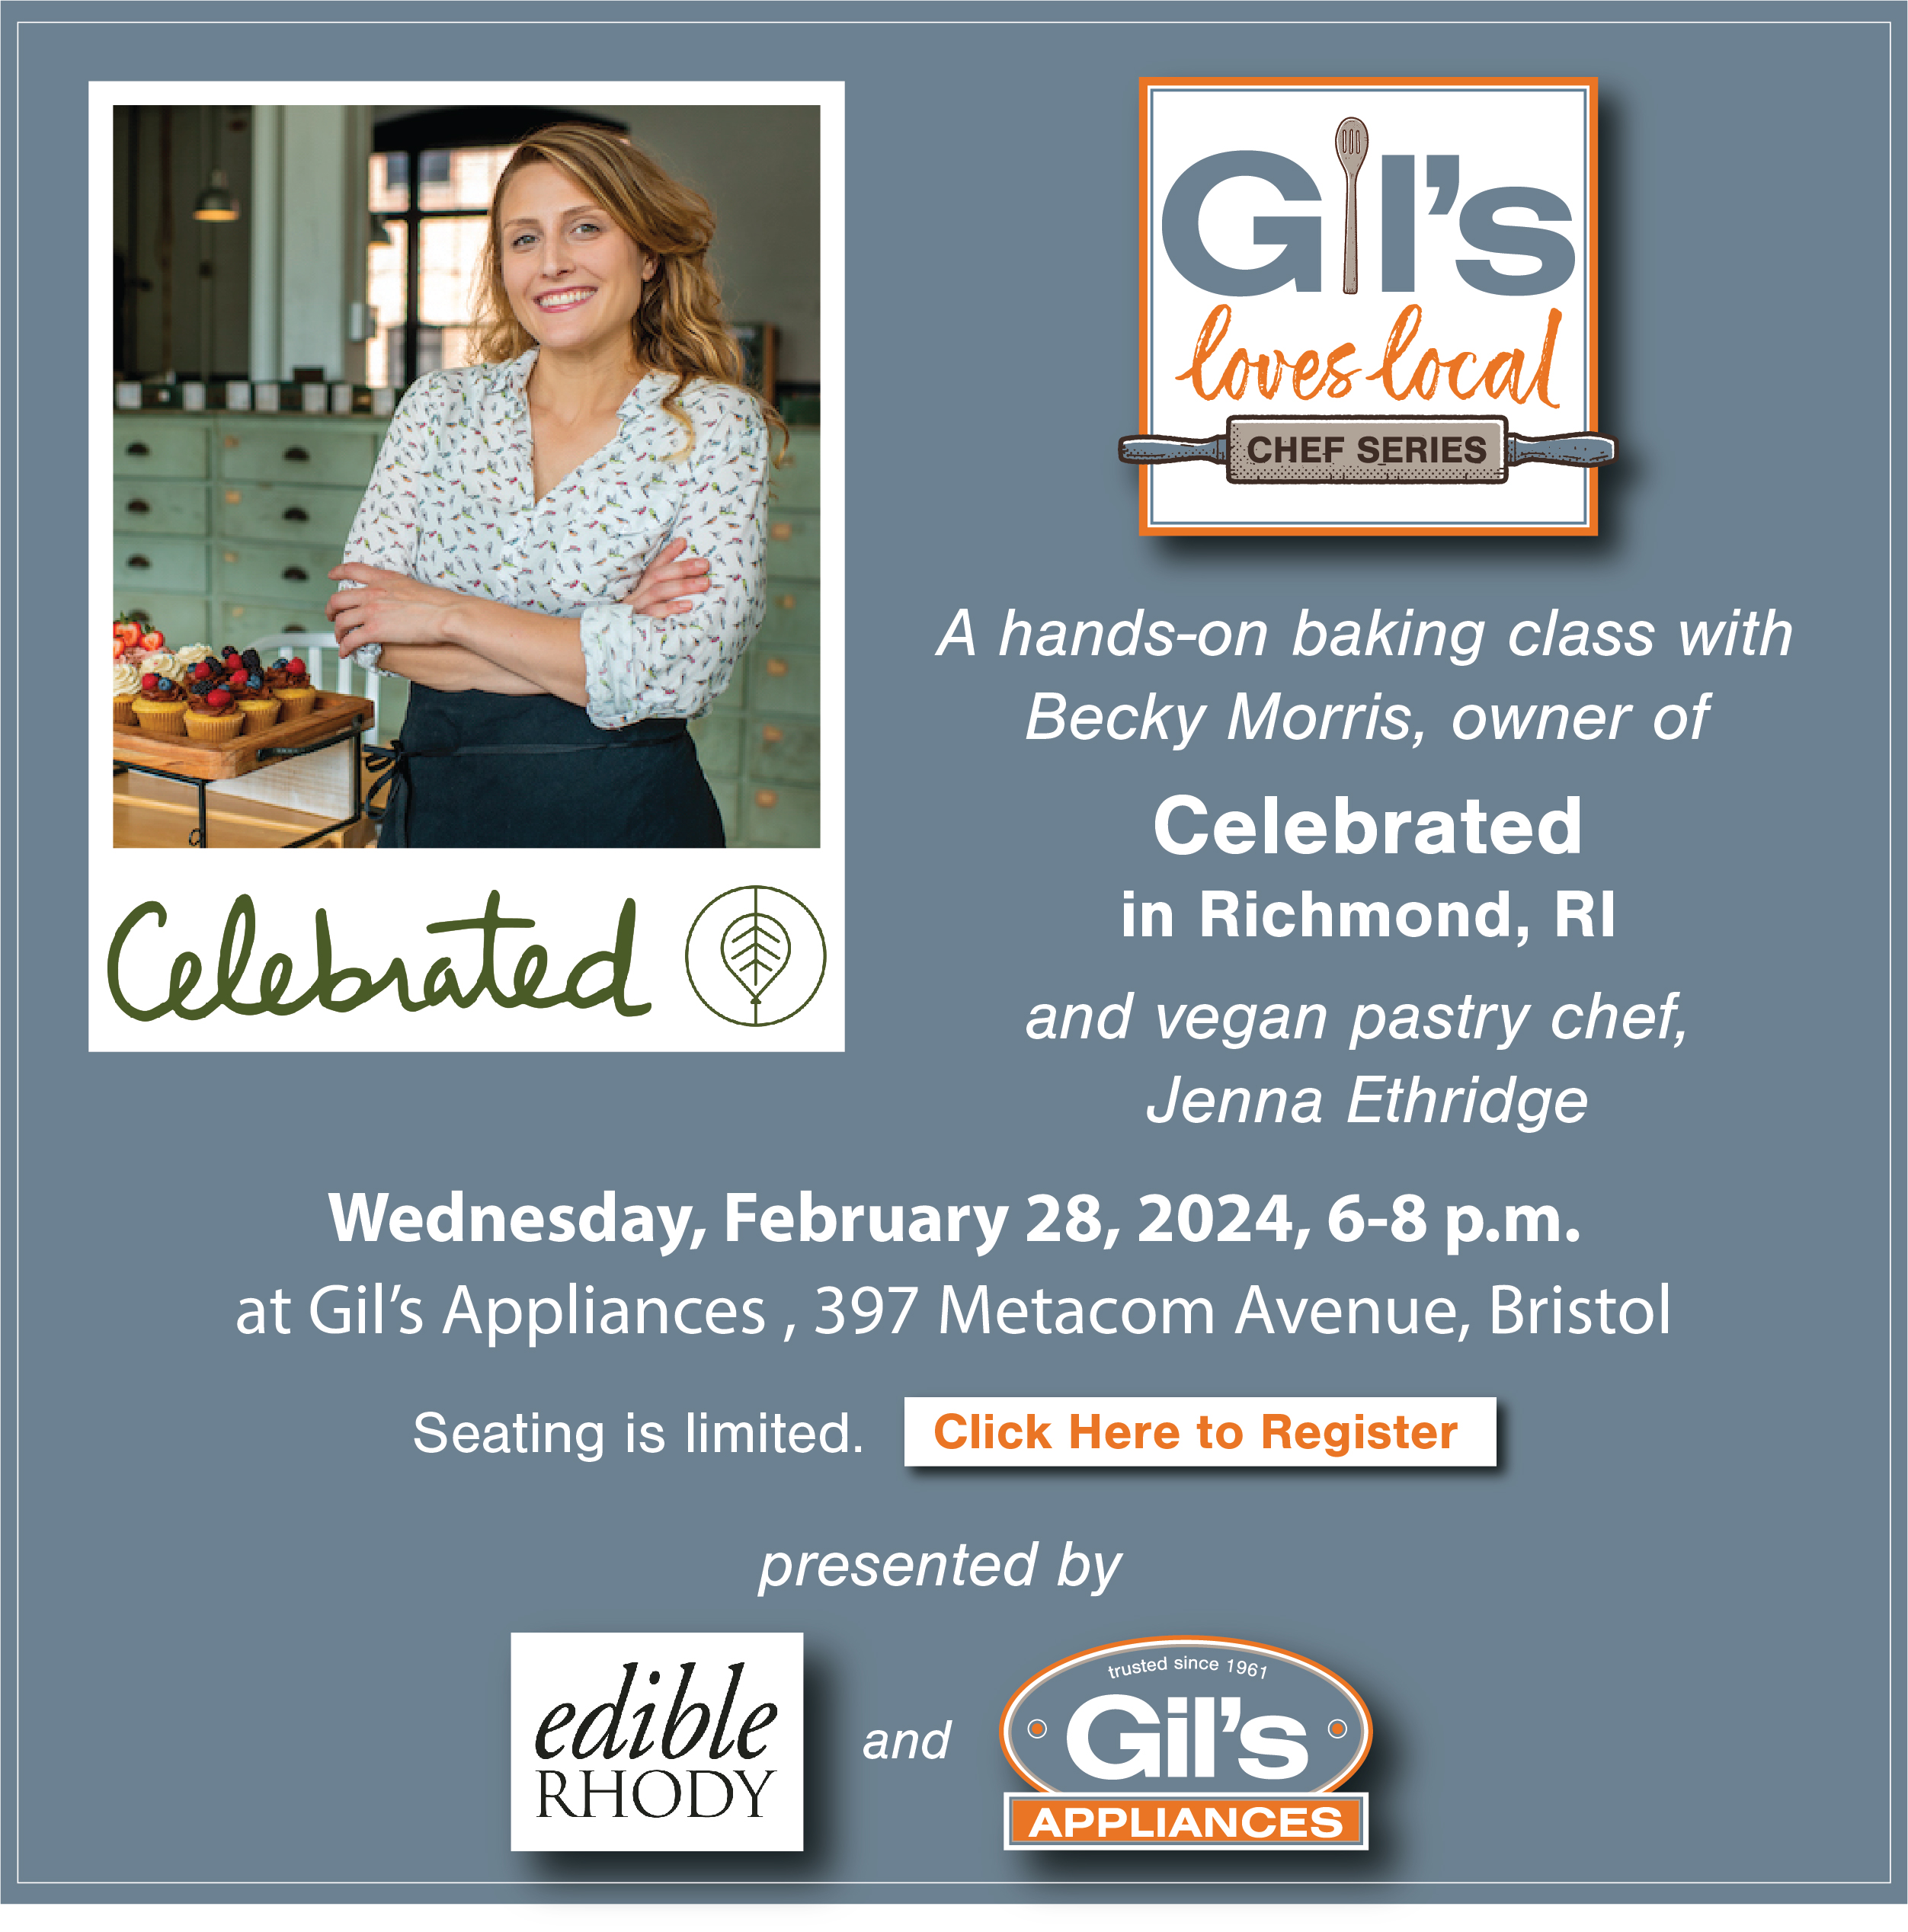 Gil's Love Local - Join a hands on baking class with Becky Morris, owner of Celebrated in Richmond, RI